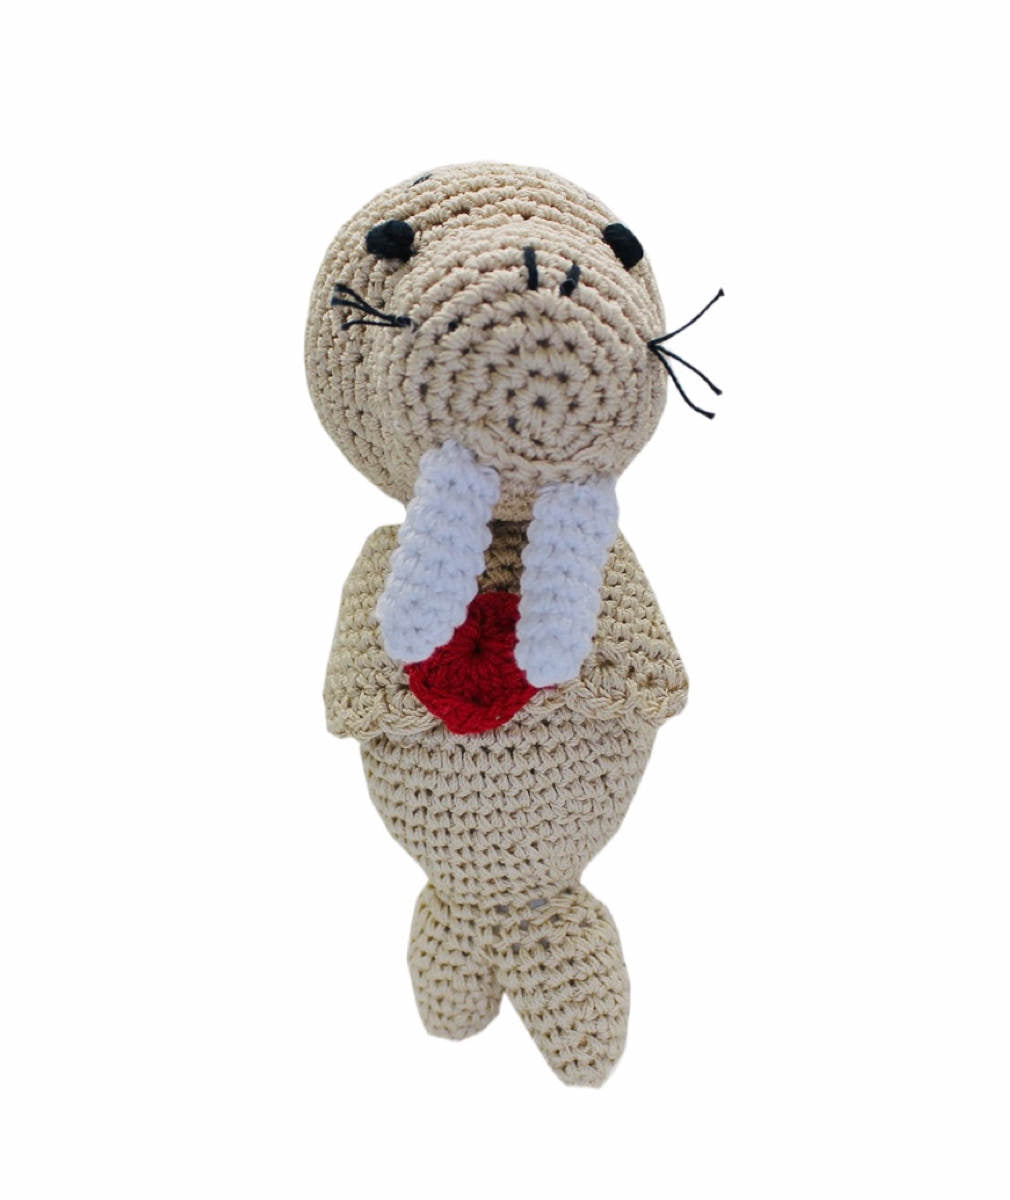 Knit Knacks "Walter the Walrus" organic cotton handmade dog toy. Tan walrus with big white teeth and a heart on his chest.